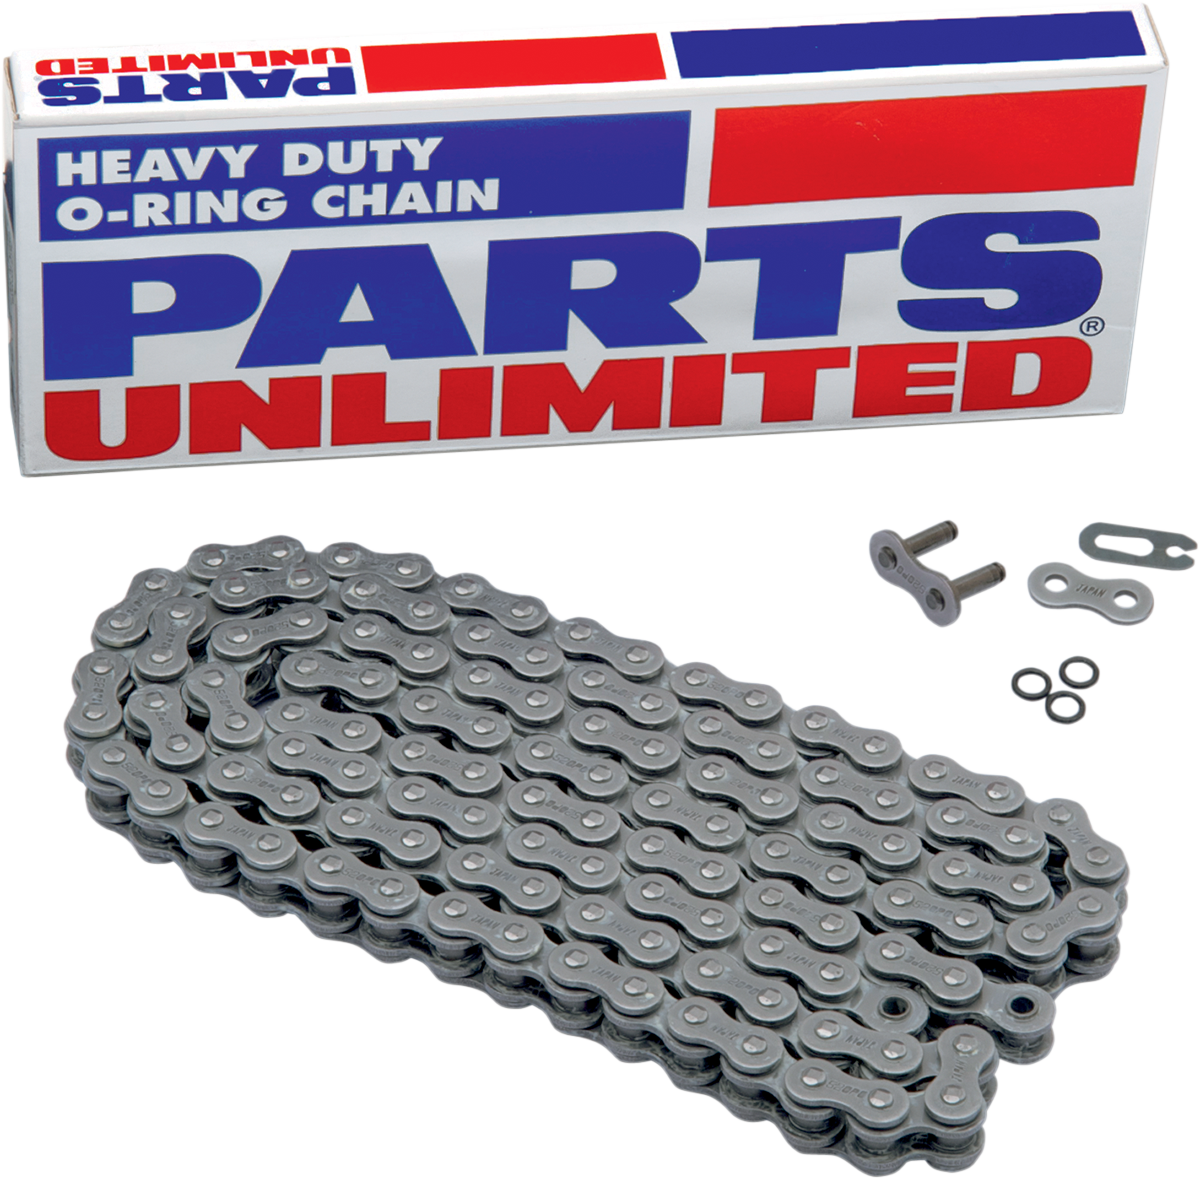 PARTS UNLIMITED-CHAIN MOTORCYCLE CHAIN CHAIN PU 525 X-RNG X 100F